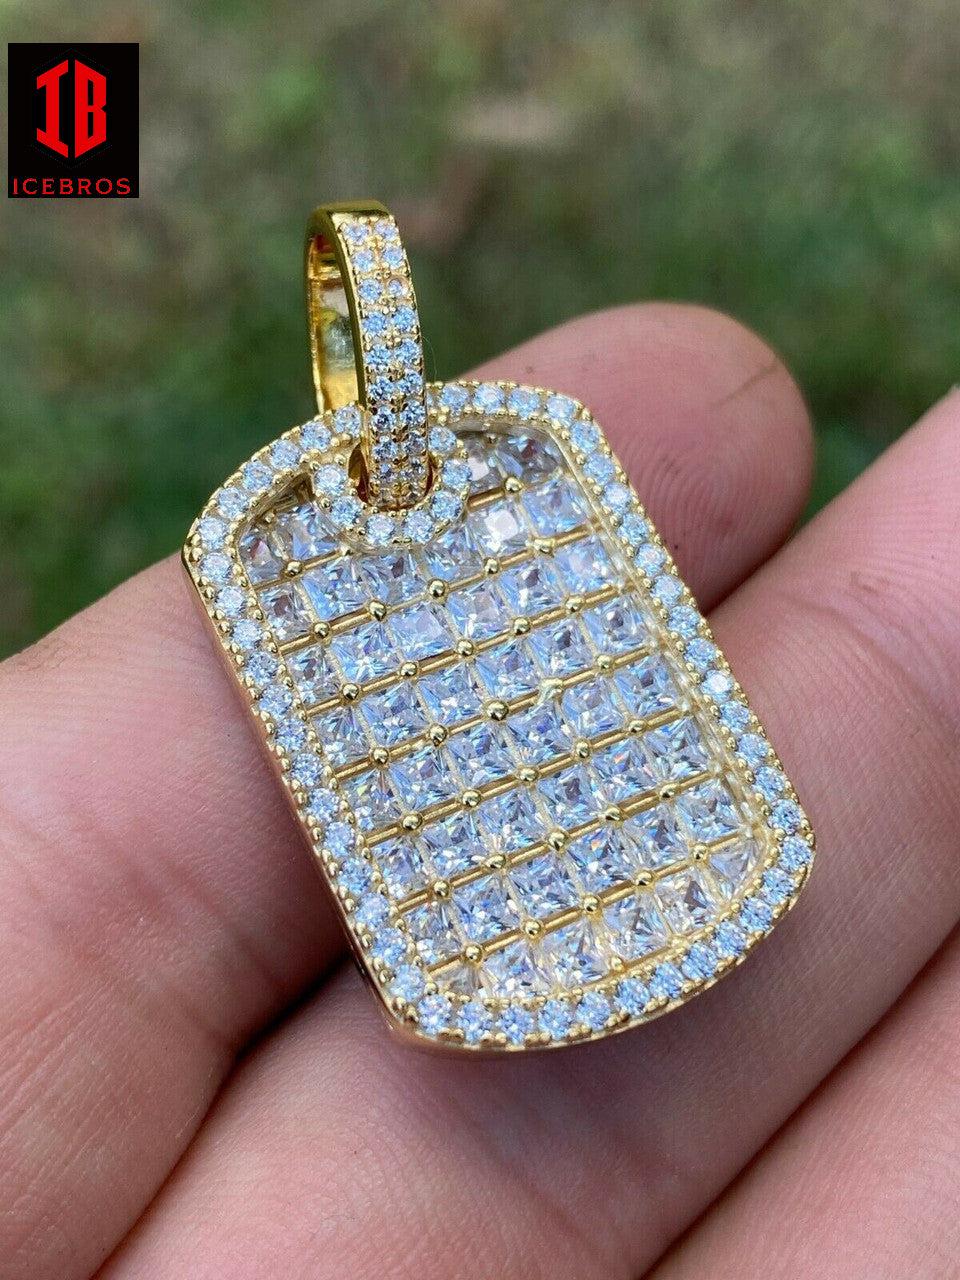 Solid 925 Silver Men's Dog Tag Pendant Iced Baguette Diamond 1.5" Gold Bonded